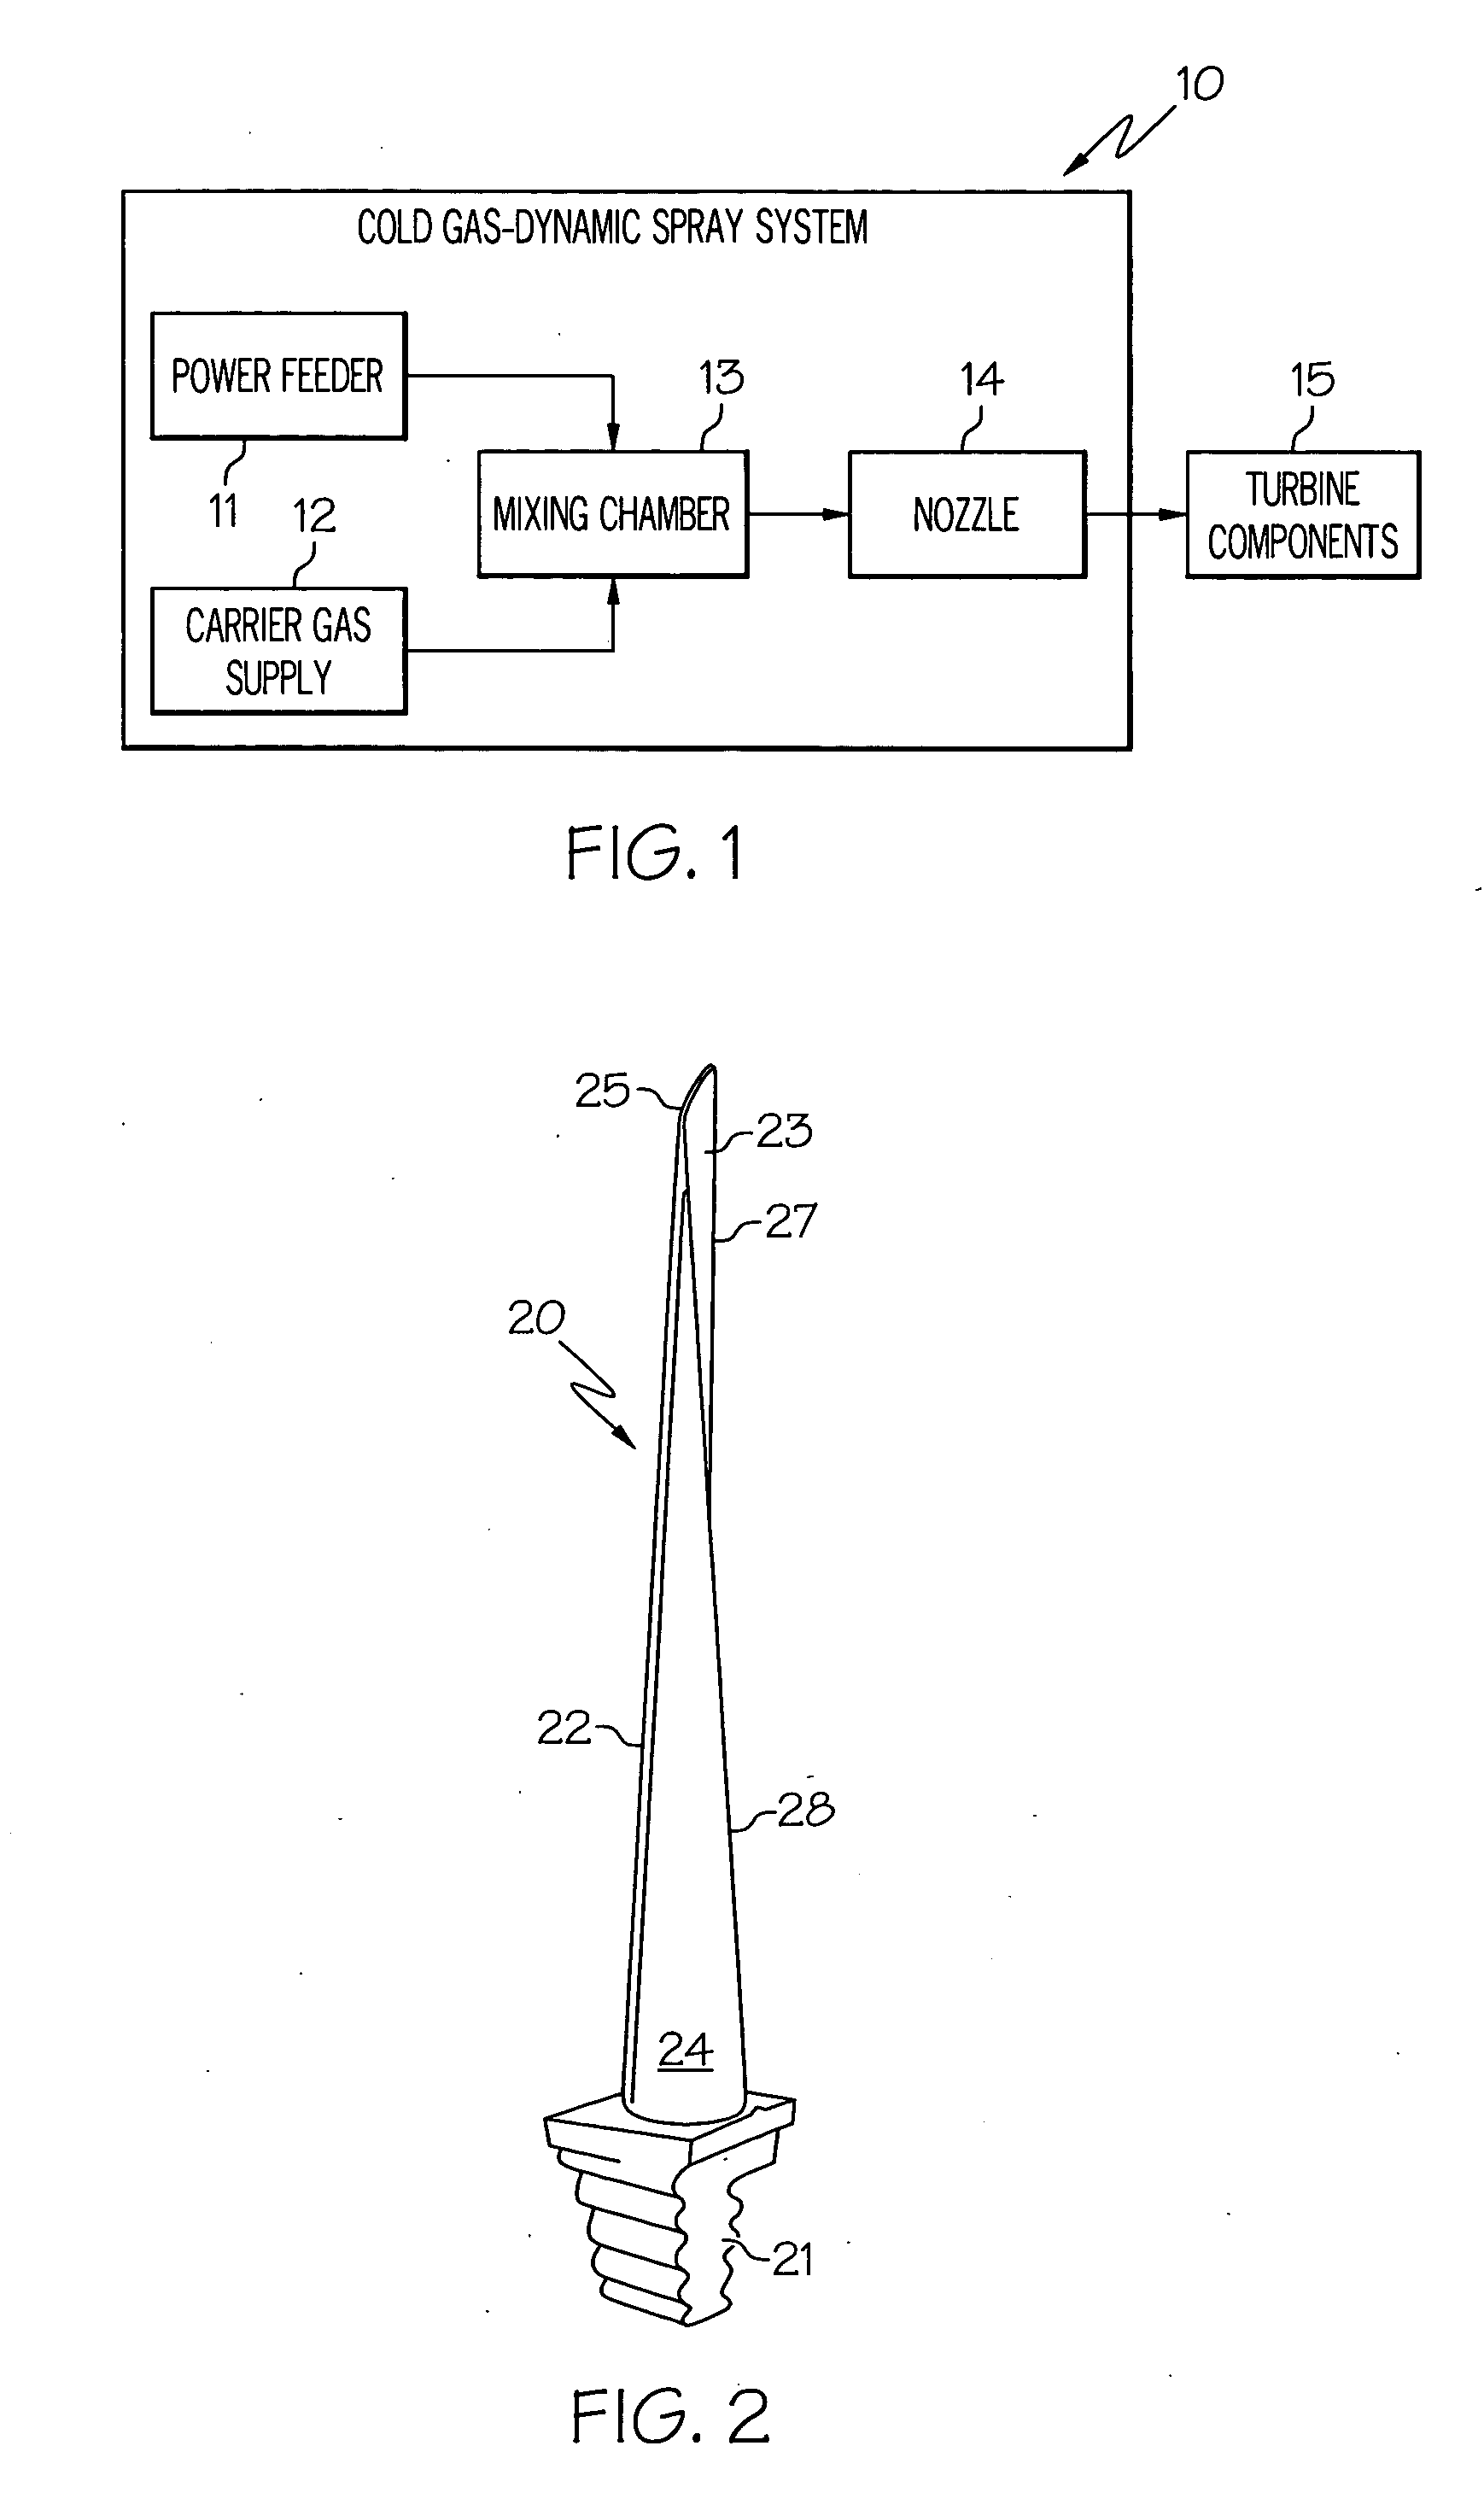 Method for applying environmental-resistant mcraly coatings on gas turbine components